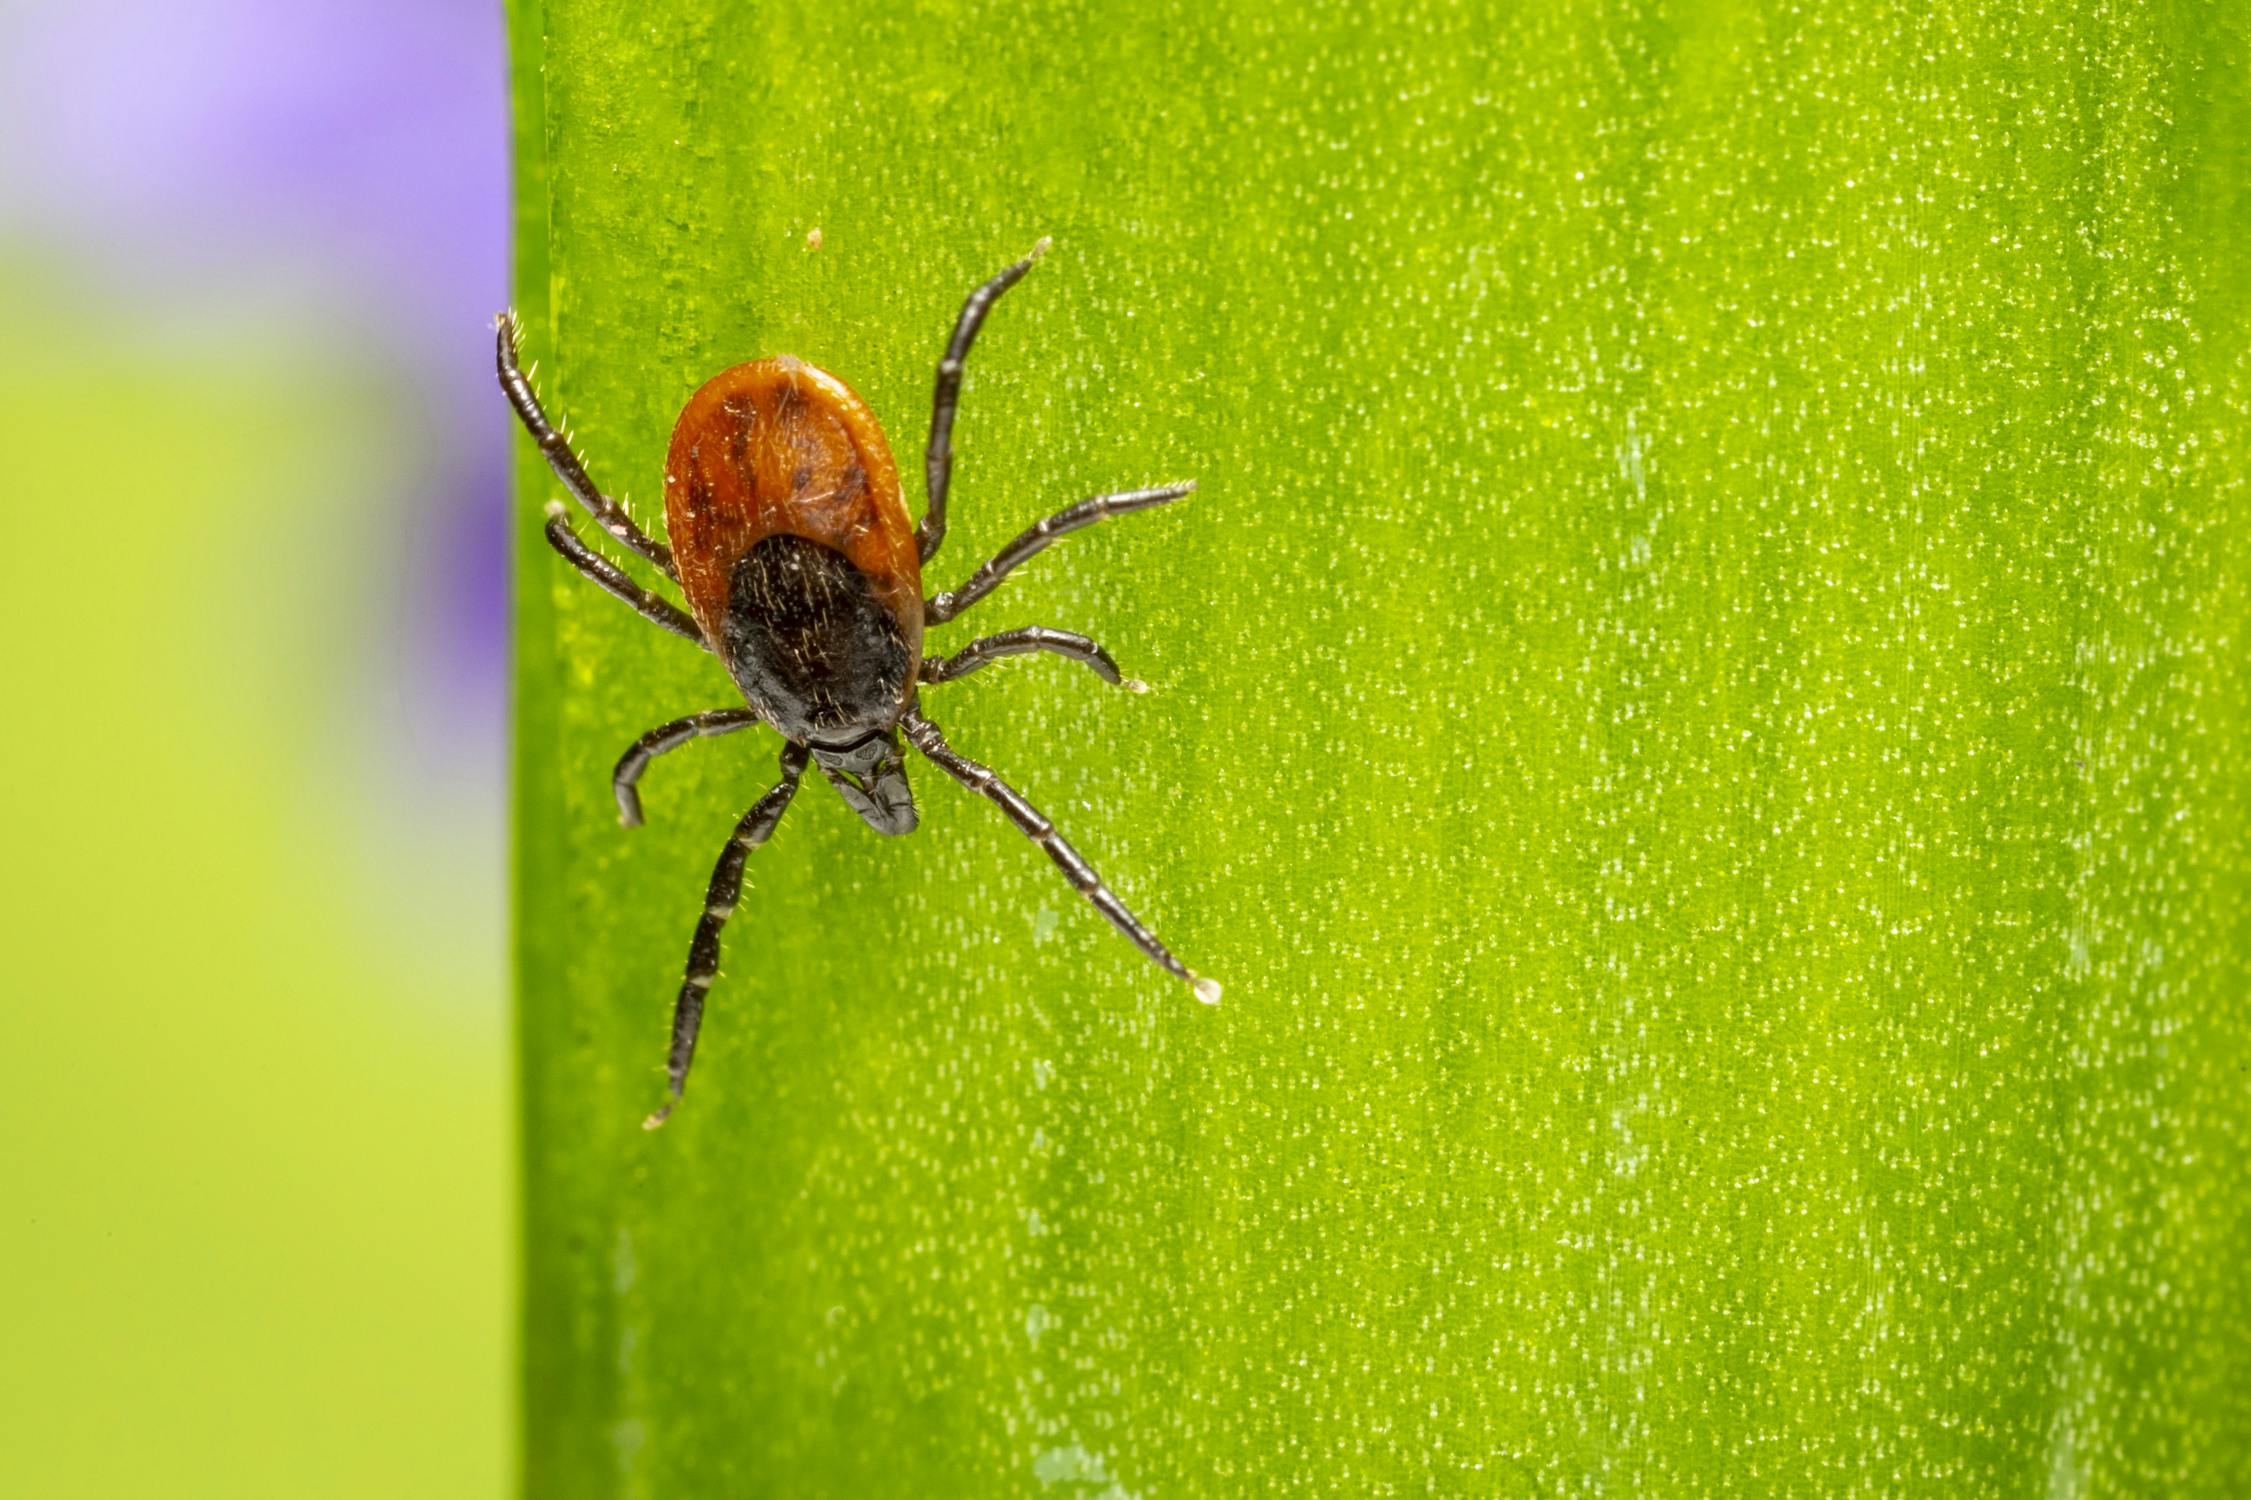 There is a great risk that there will be a long tick season this year. (Photo: Erik Karits/Pexels)